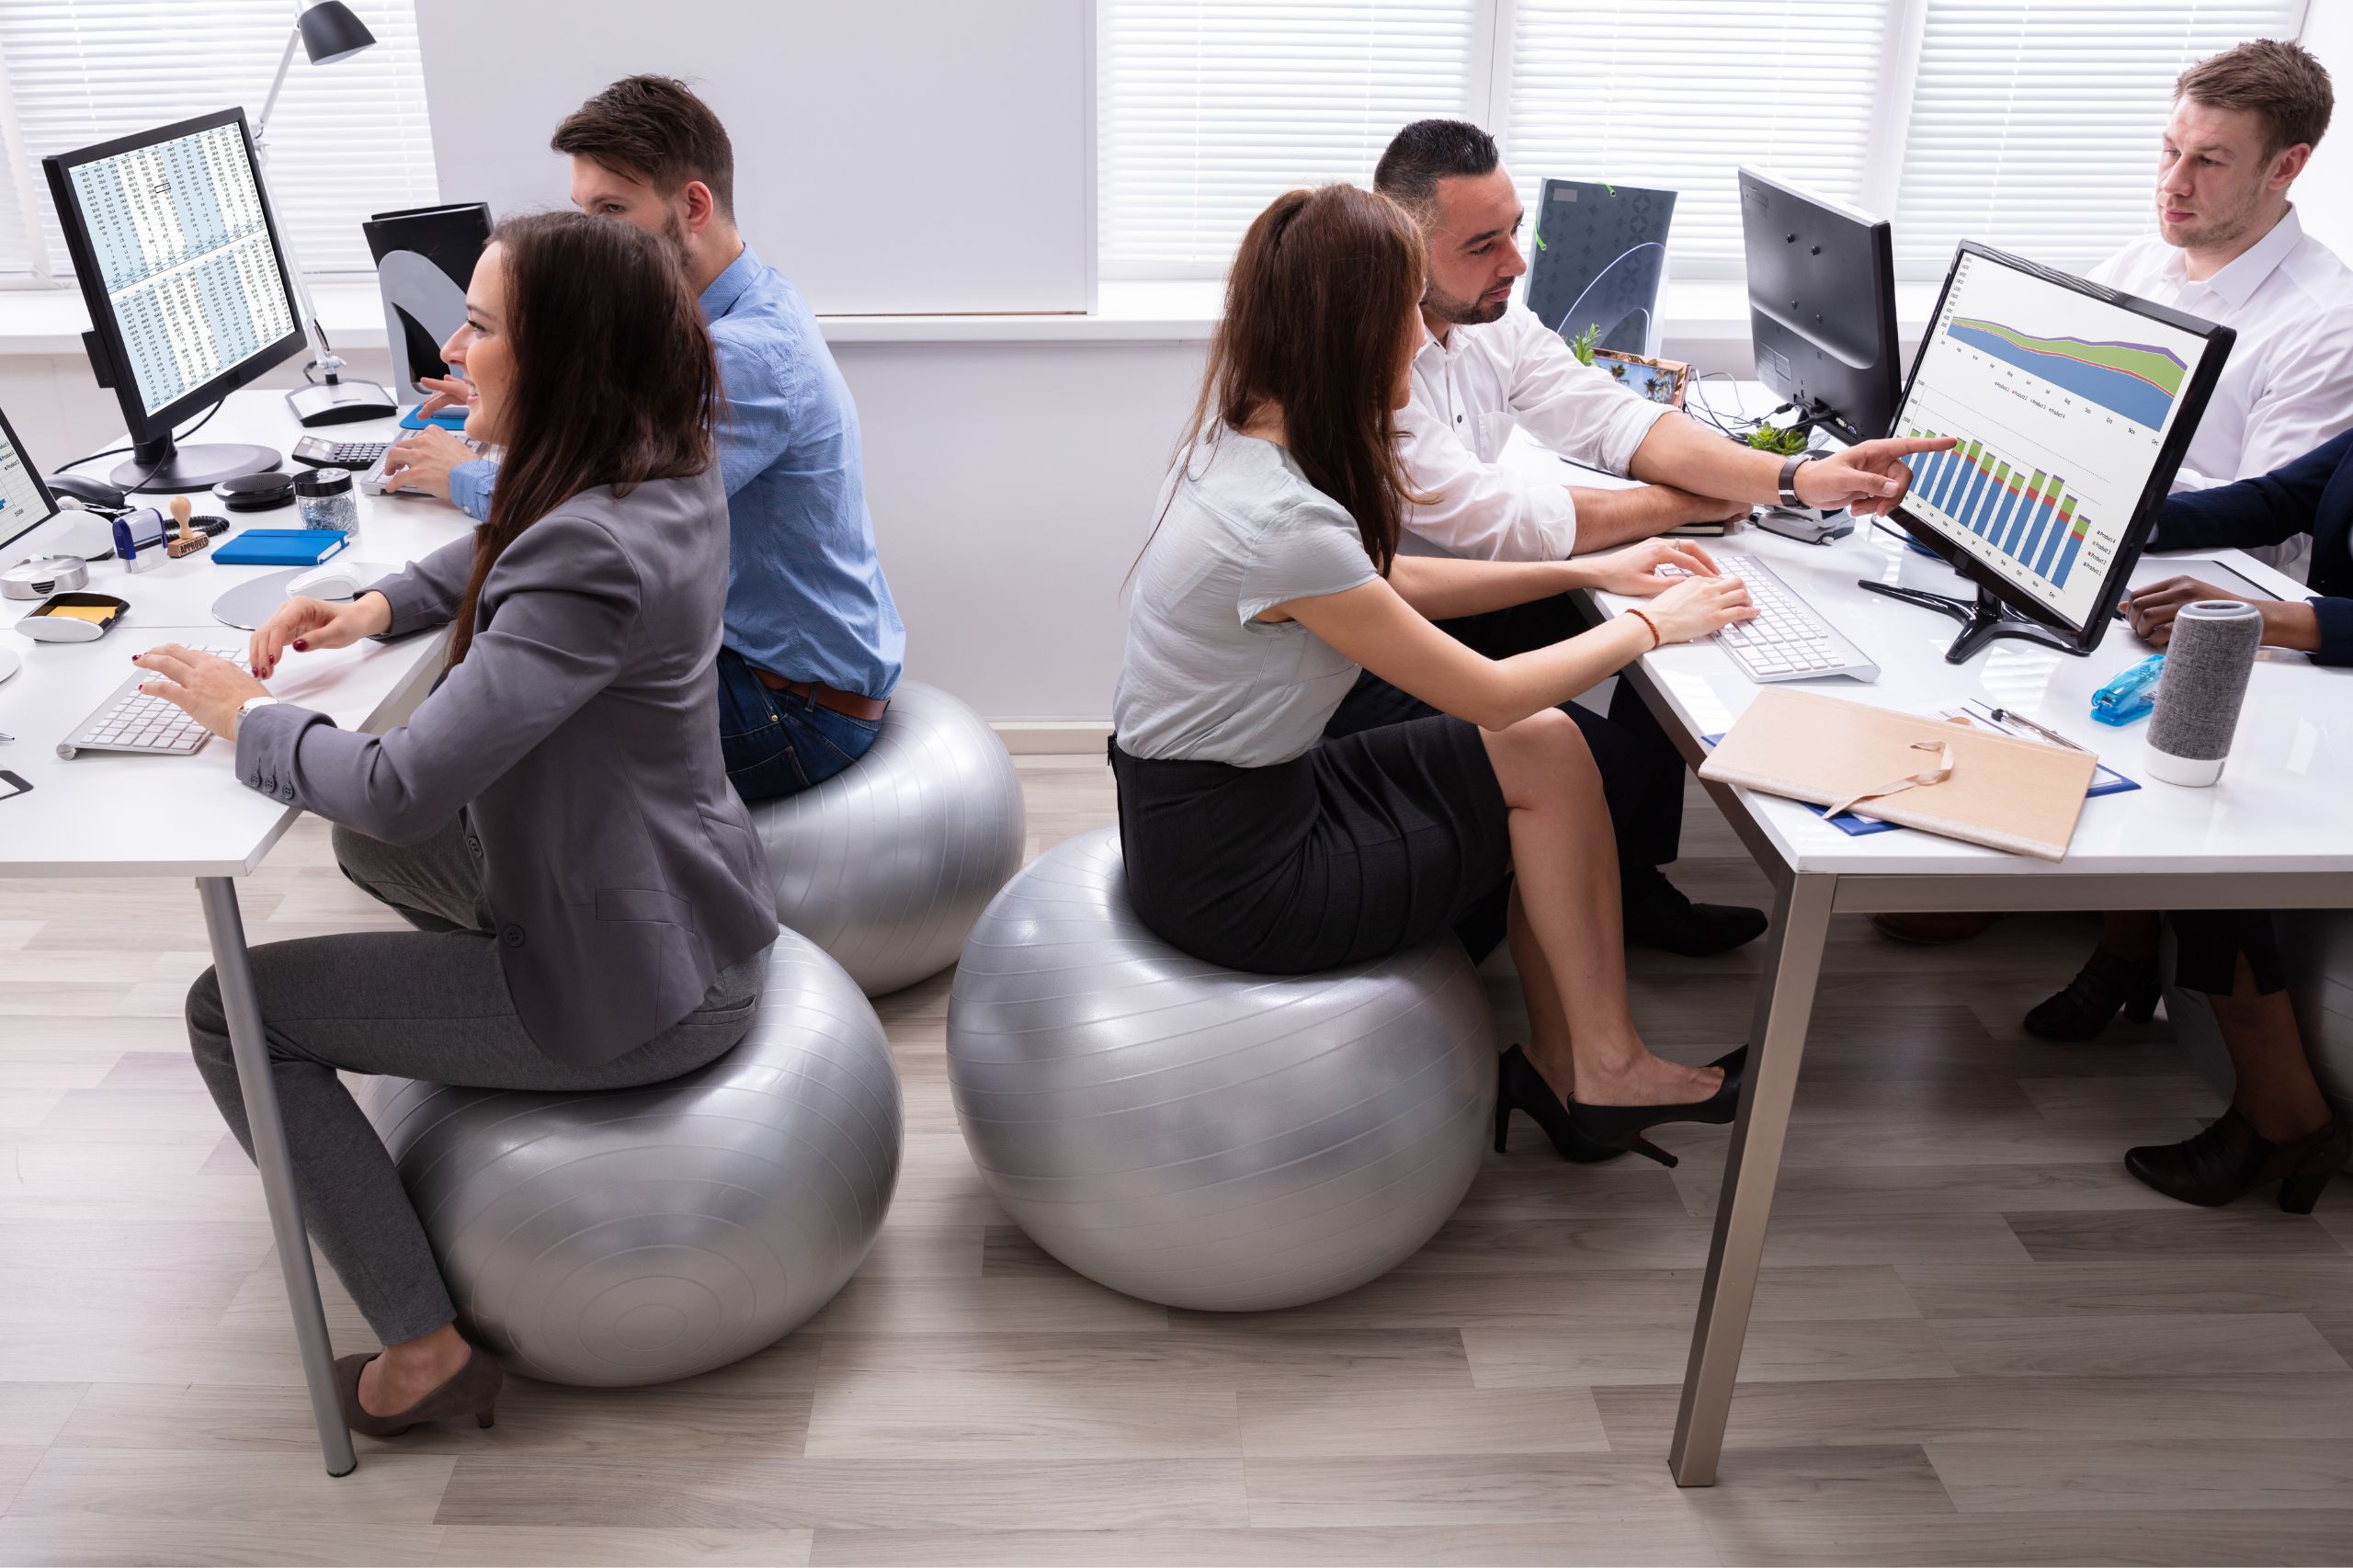 group of employee sharing ideas in workplace sitting on fitness ball